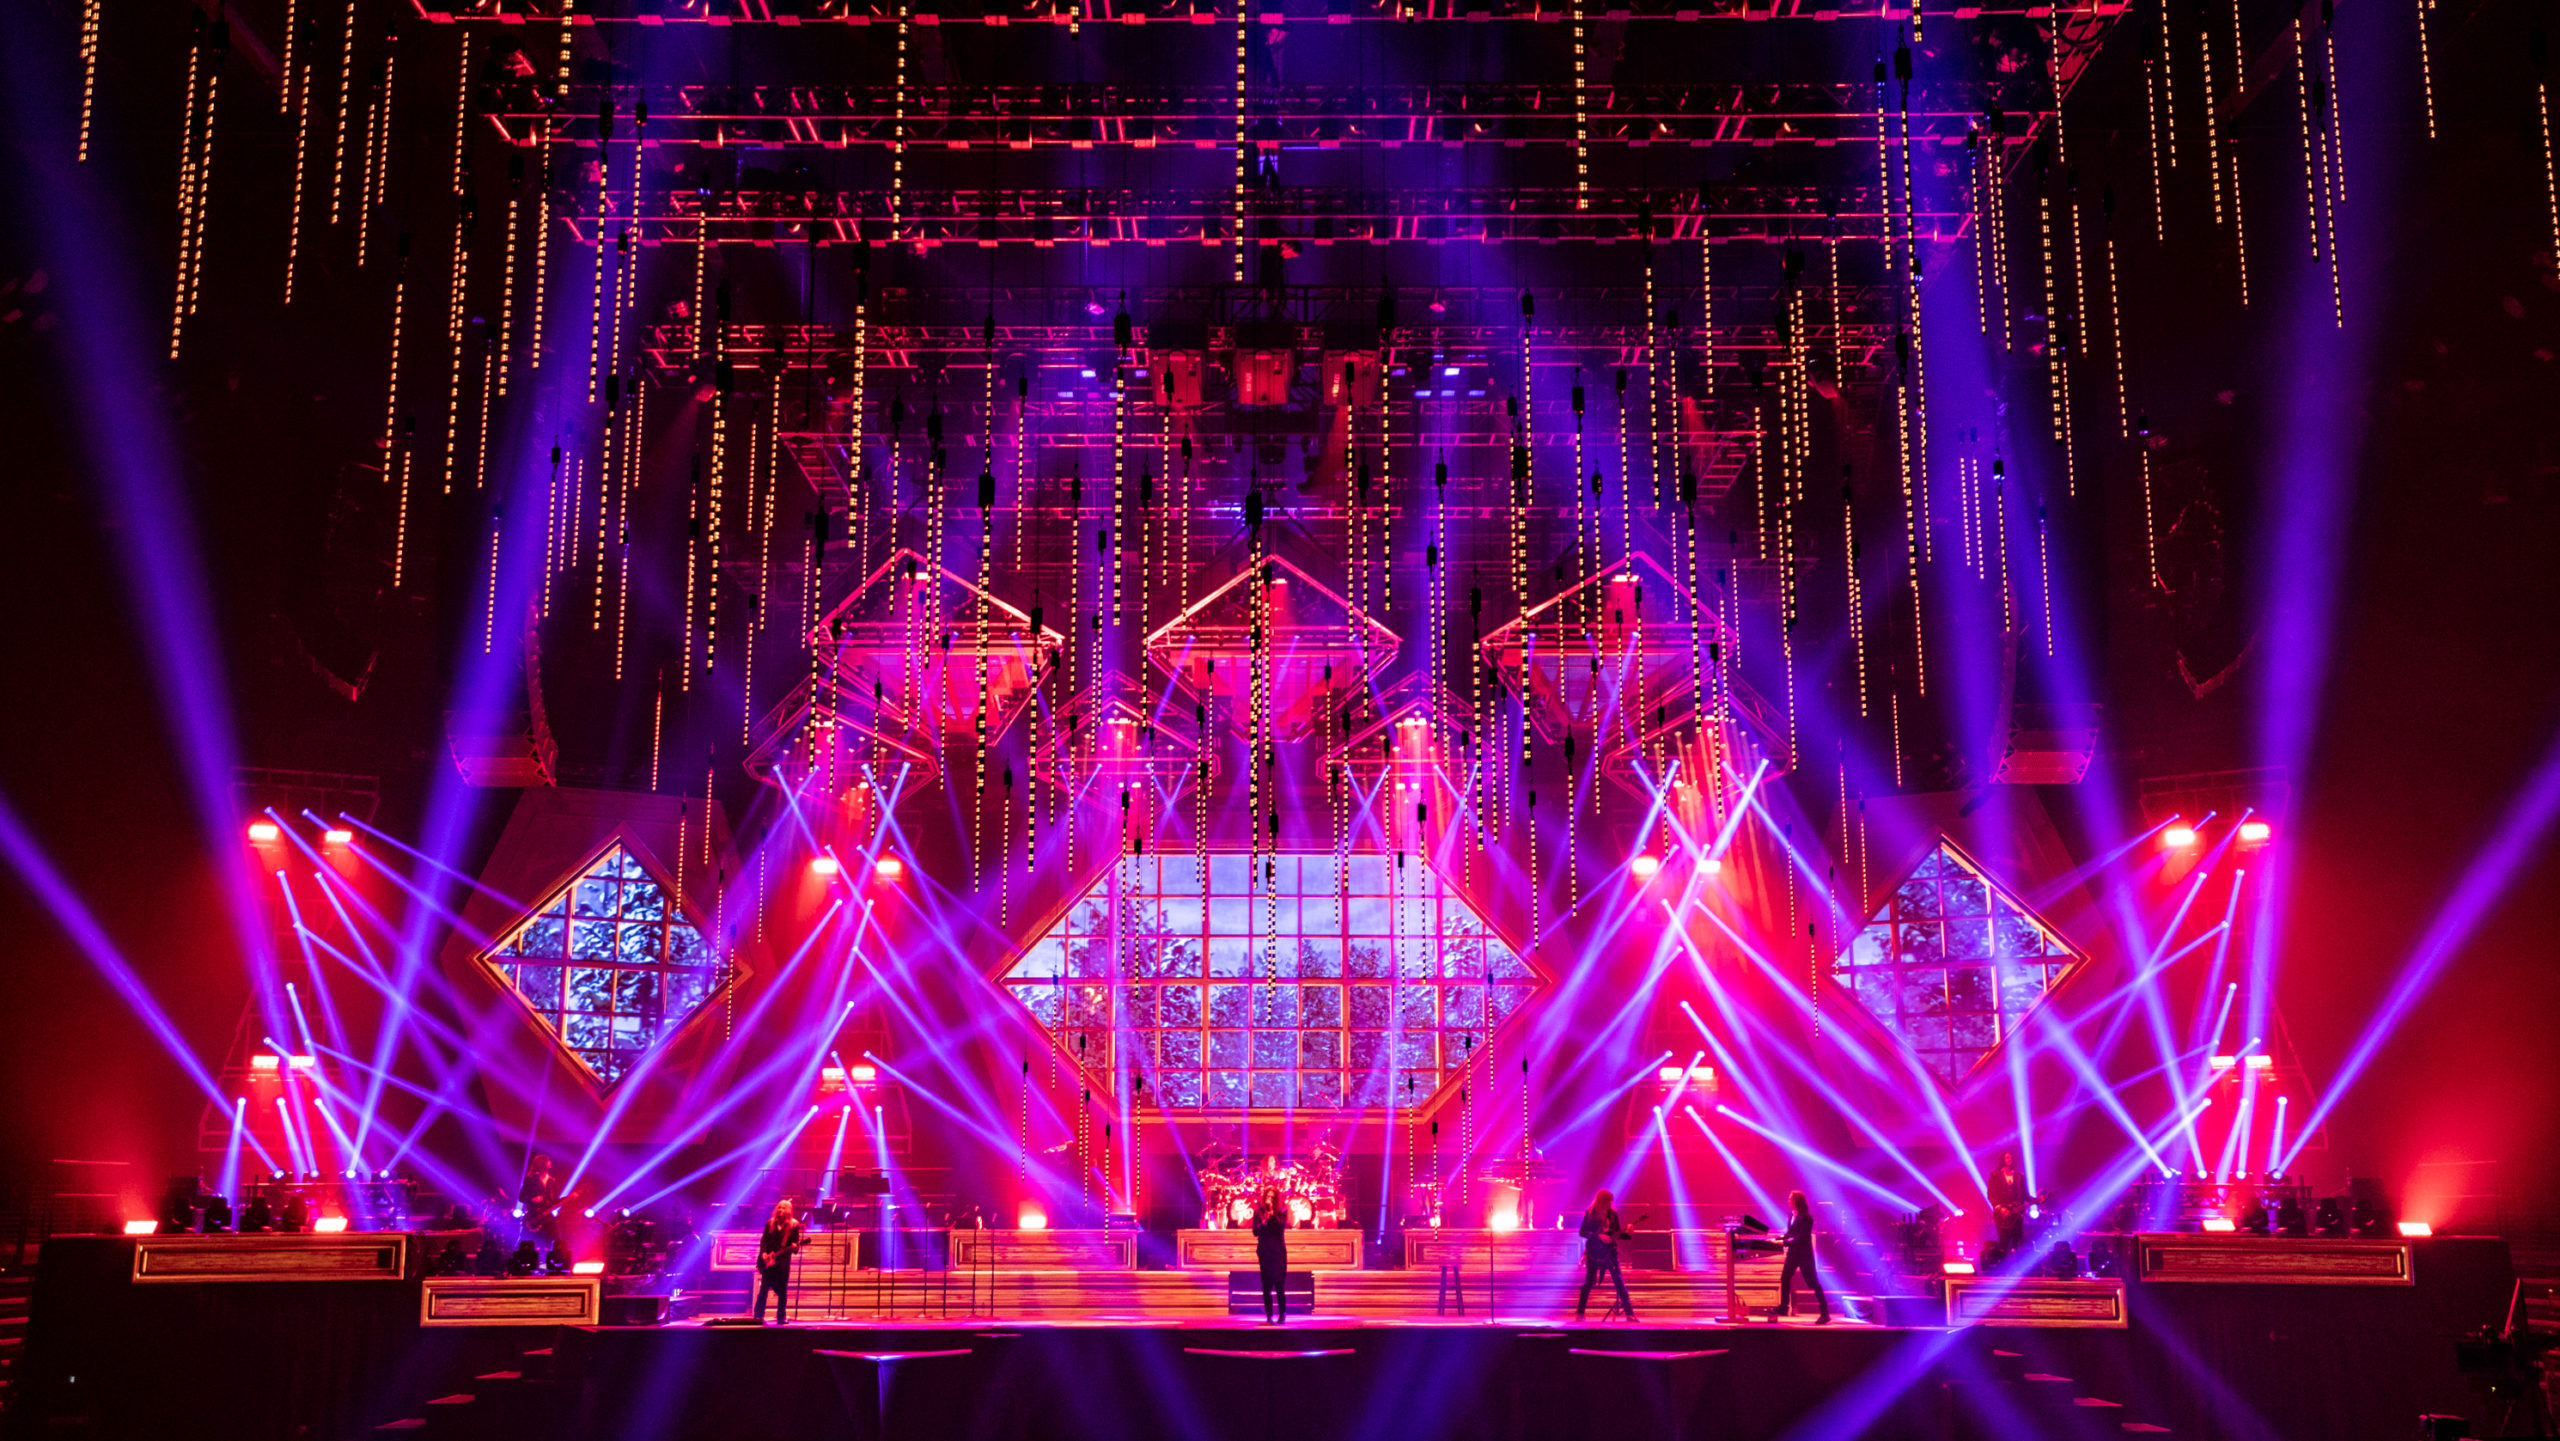 trans-siberian-orchestra-scaled-4278699-6849939-jpg